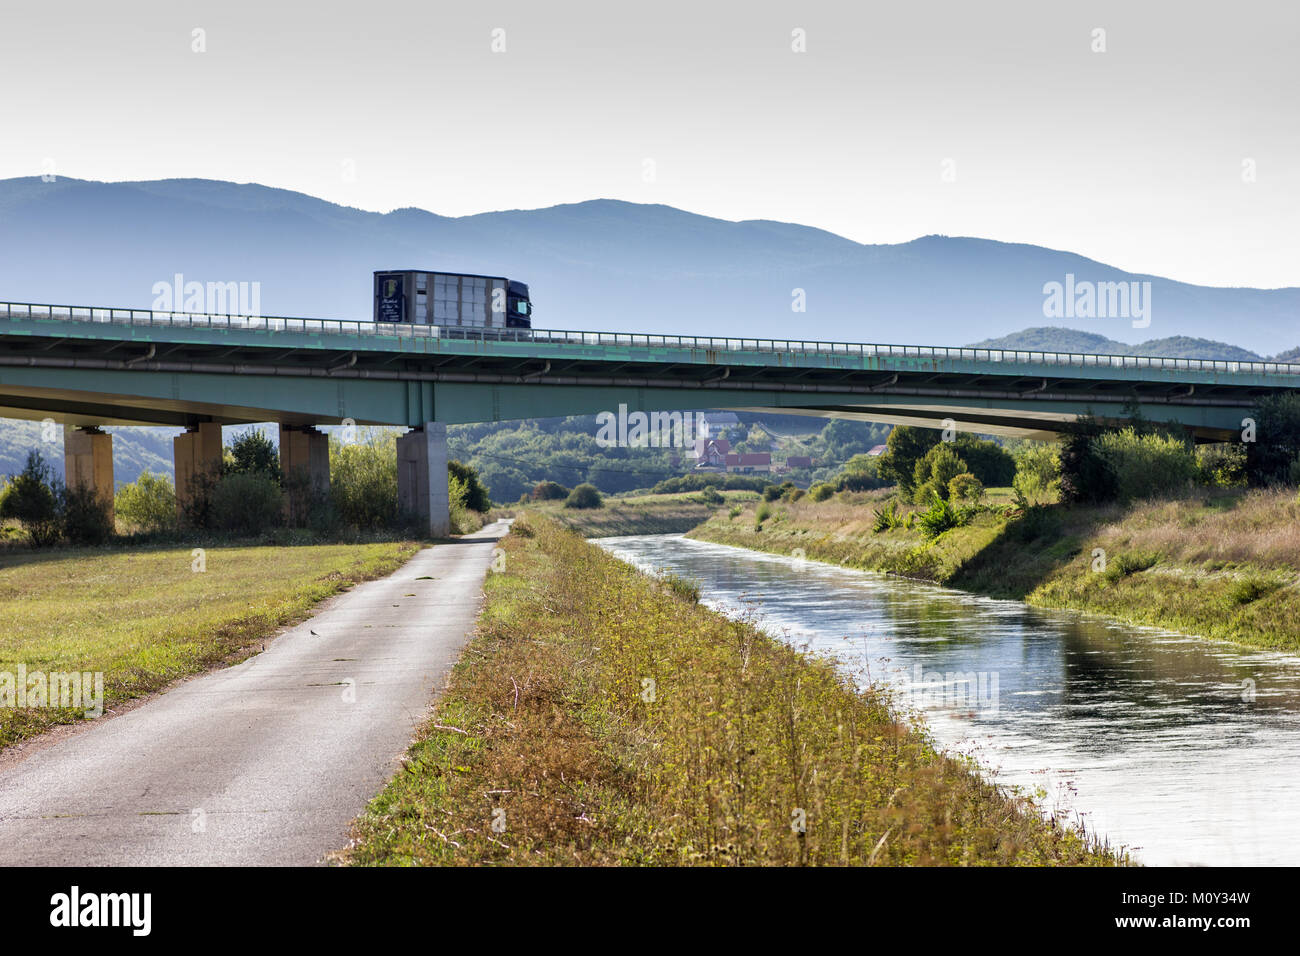 Lorry on the A1 highway viaduct  crossing a small side road and the river Gacka near Otocac, Croatia, 2017 Stock Photo